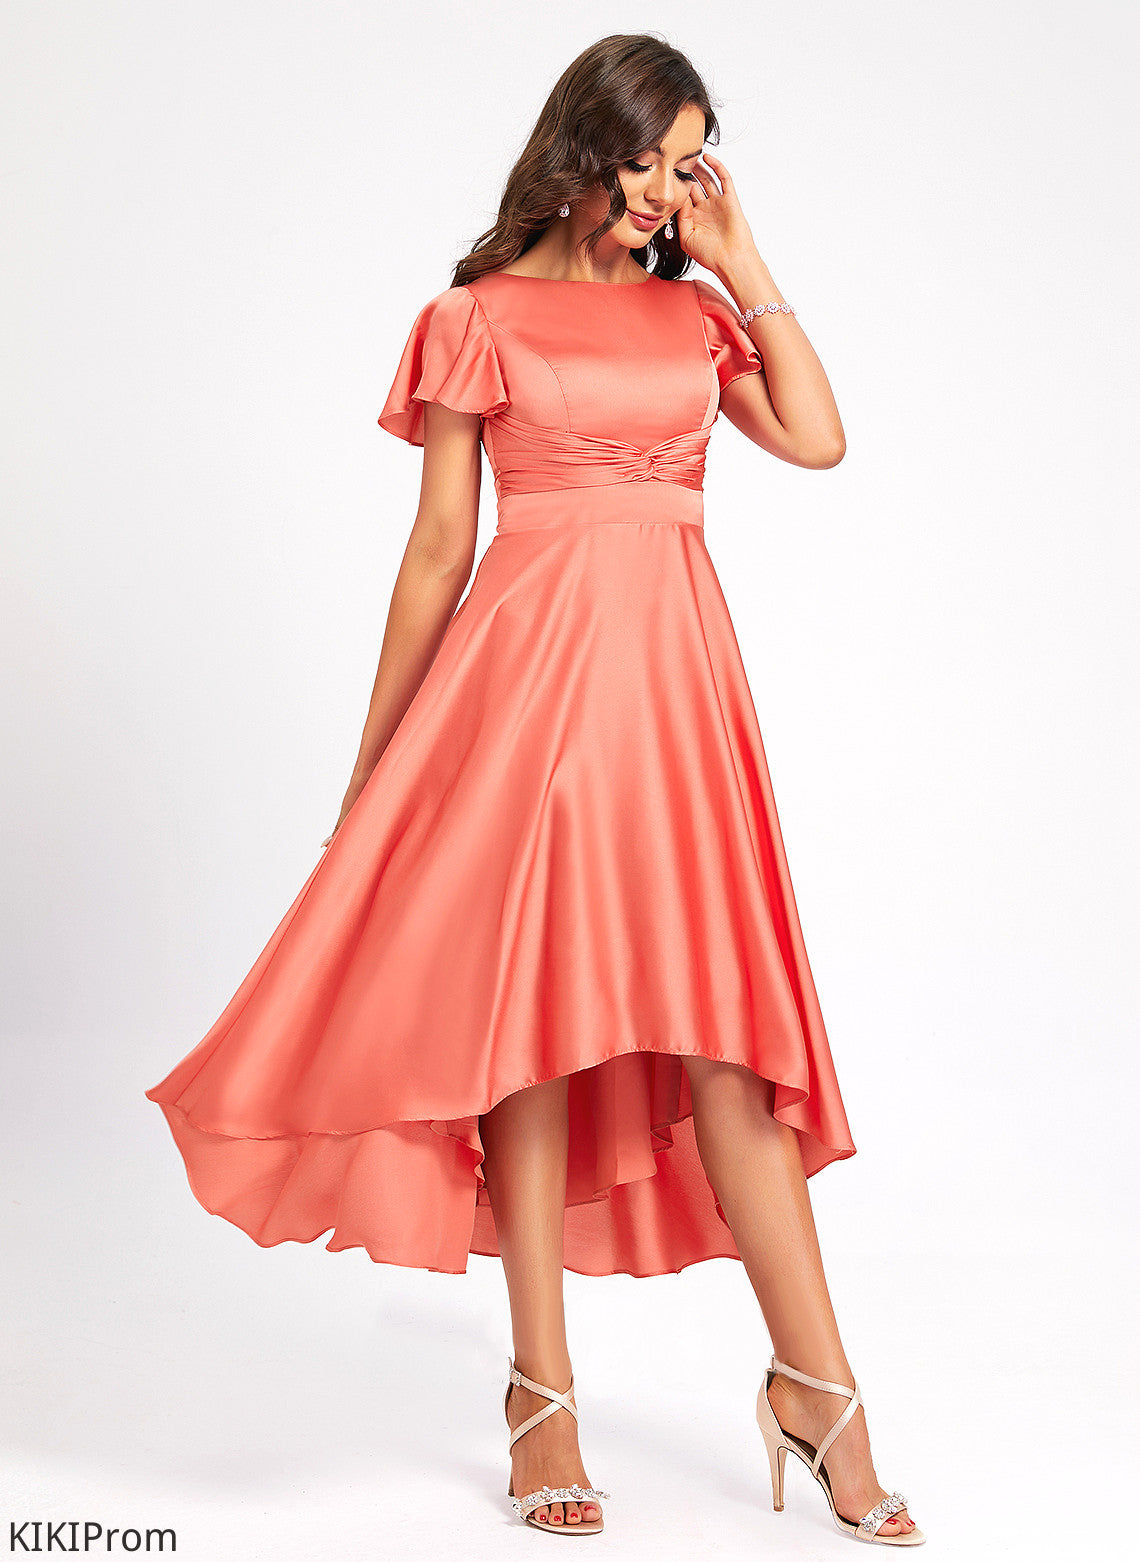 Neck Yaritza A-Line Polyester Cocktail Dresses Scoop Pleated Cocktail With Asymmetrical Dress